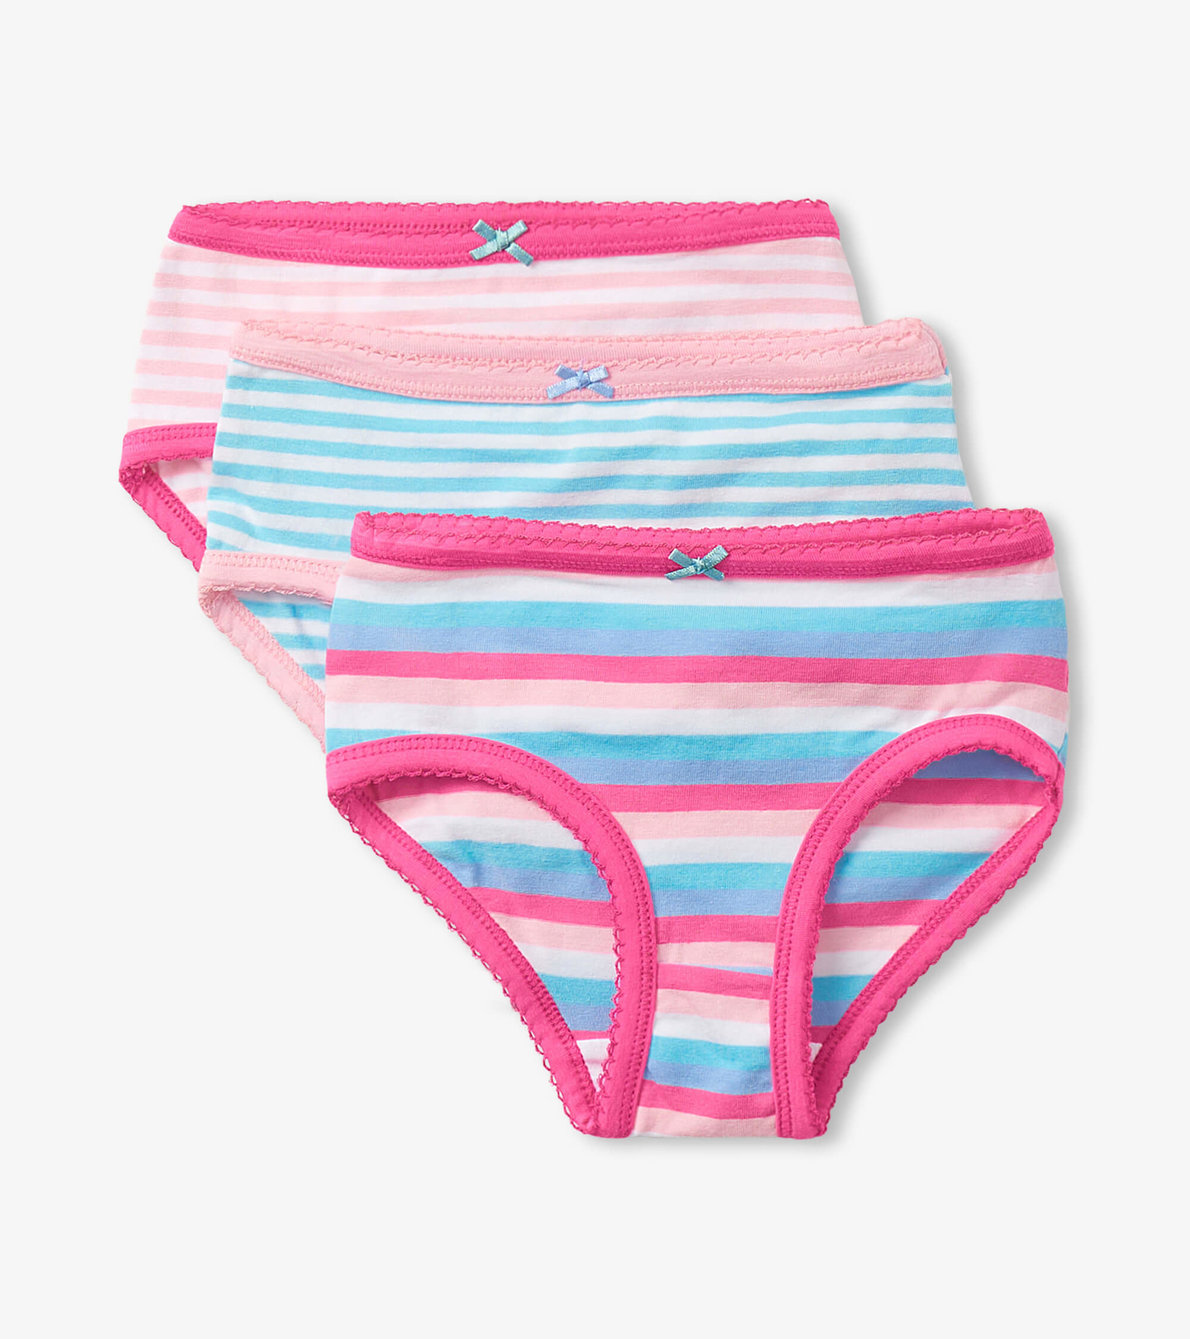 View larger image of Stripes Girls Brief Underwear 3 Pack